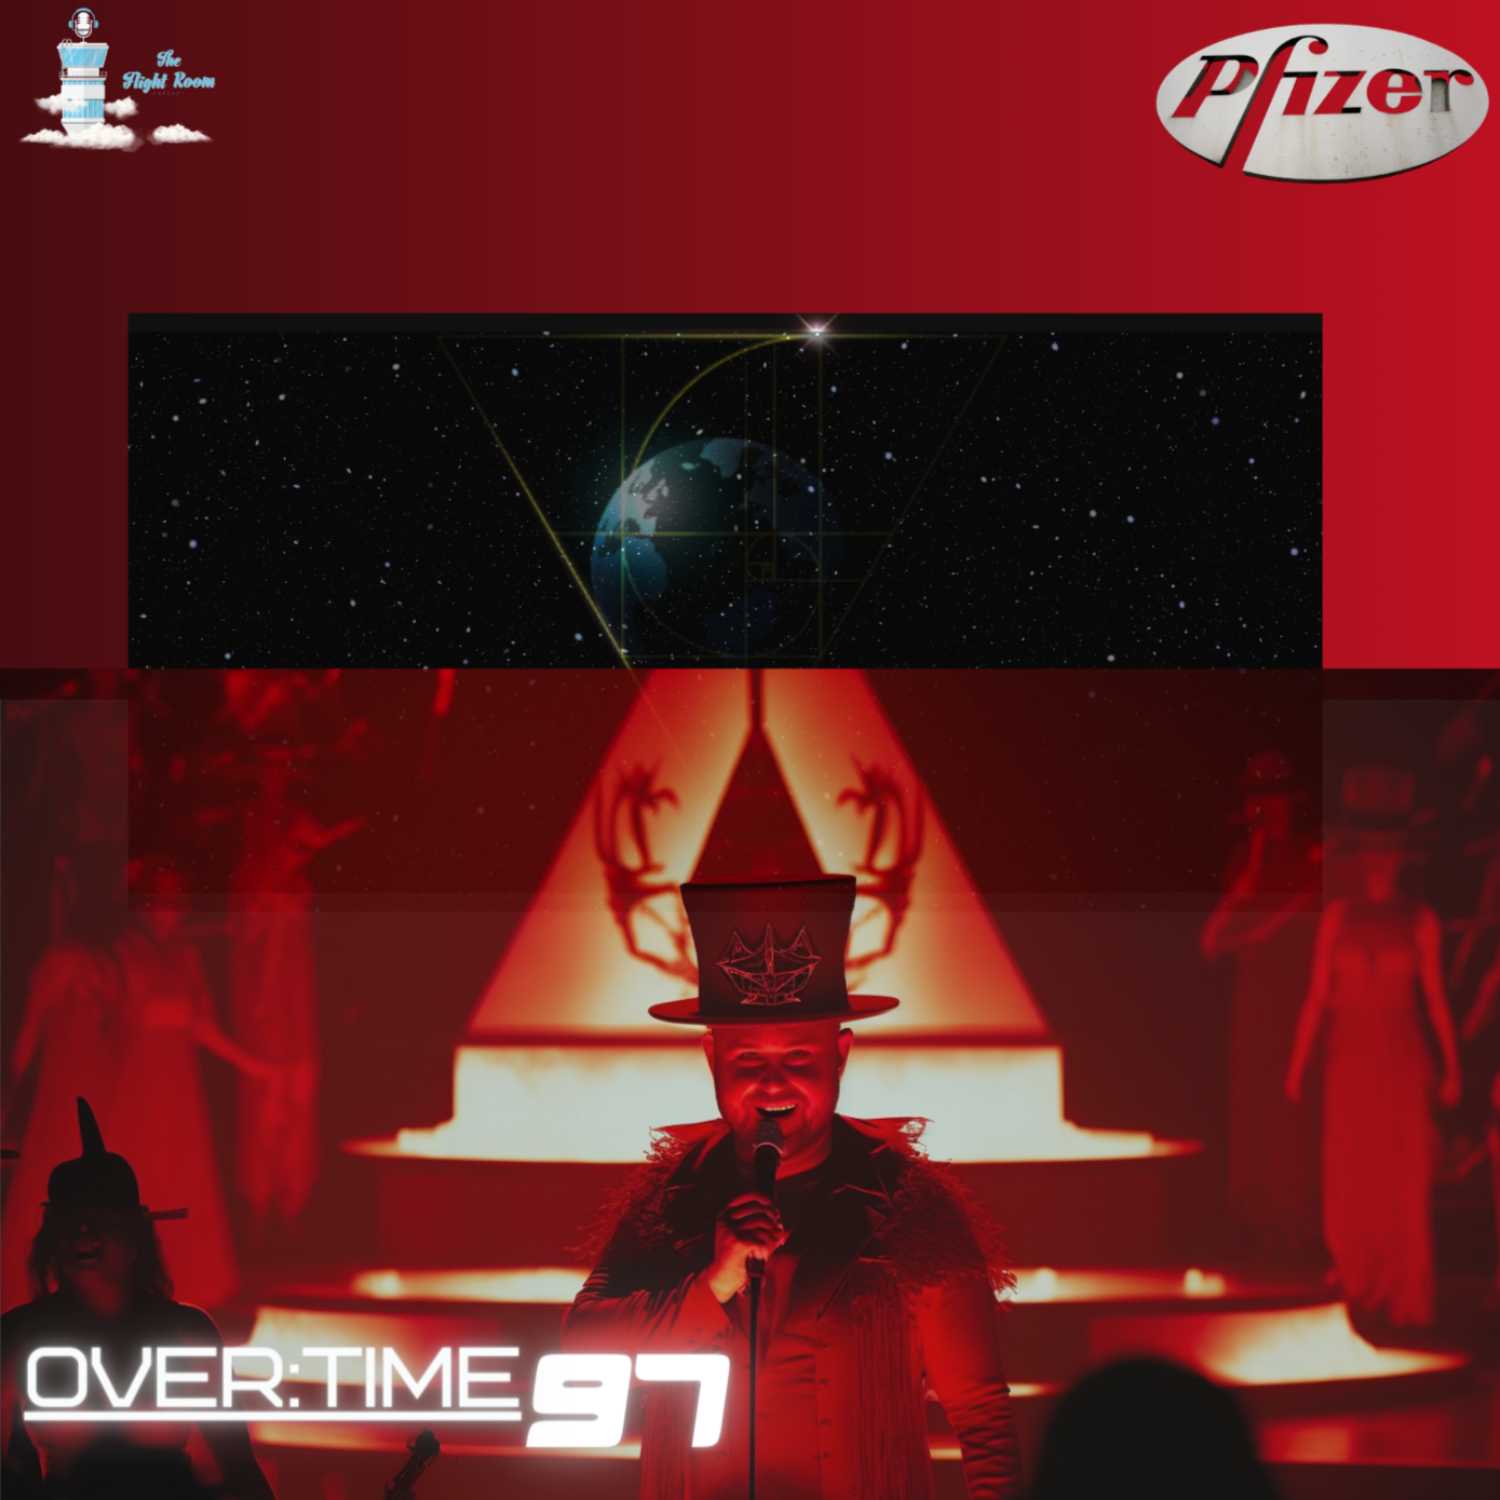 OVER:TIME WITH THE FLIGHT ROOM #97(SAME OL SUPER BOWL/GRAMMY RITUALS, J PRINCE ON MDWOG)